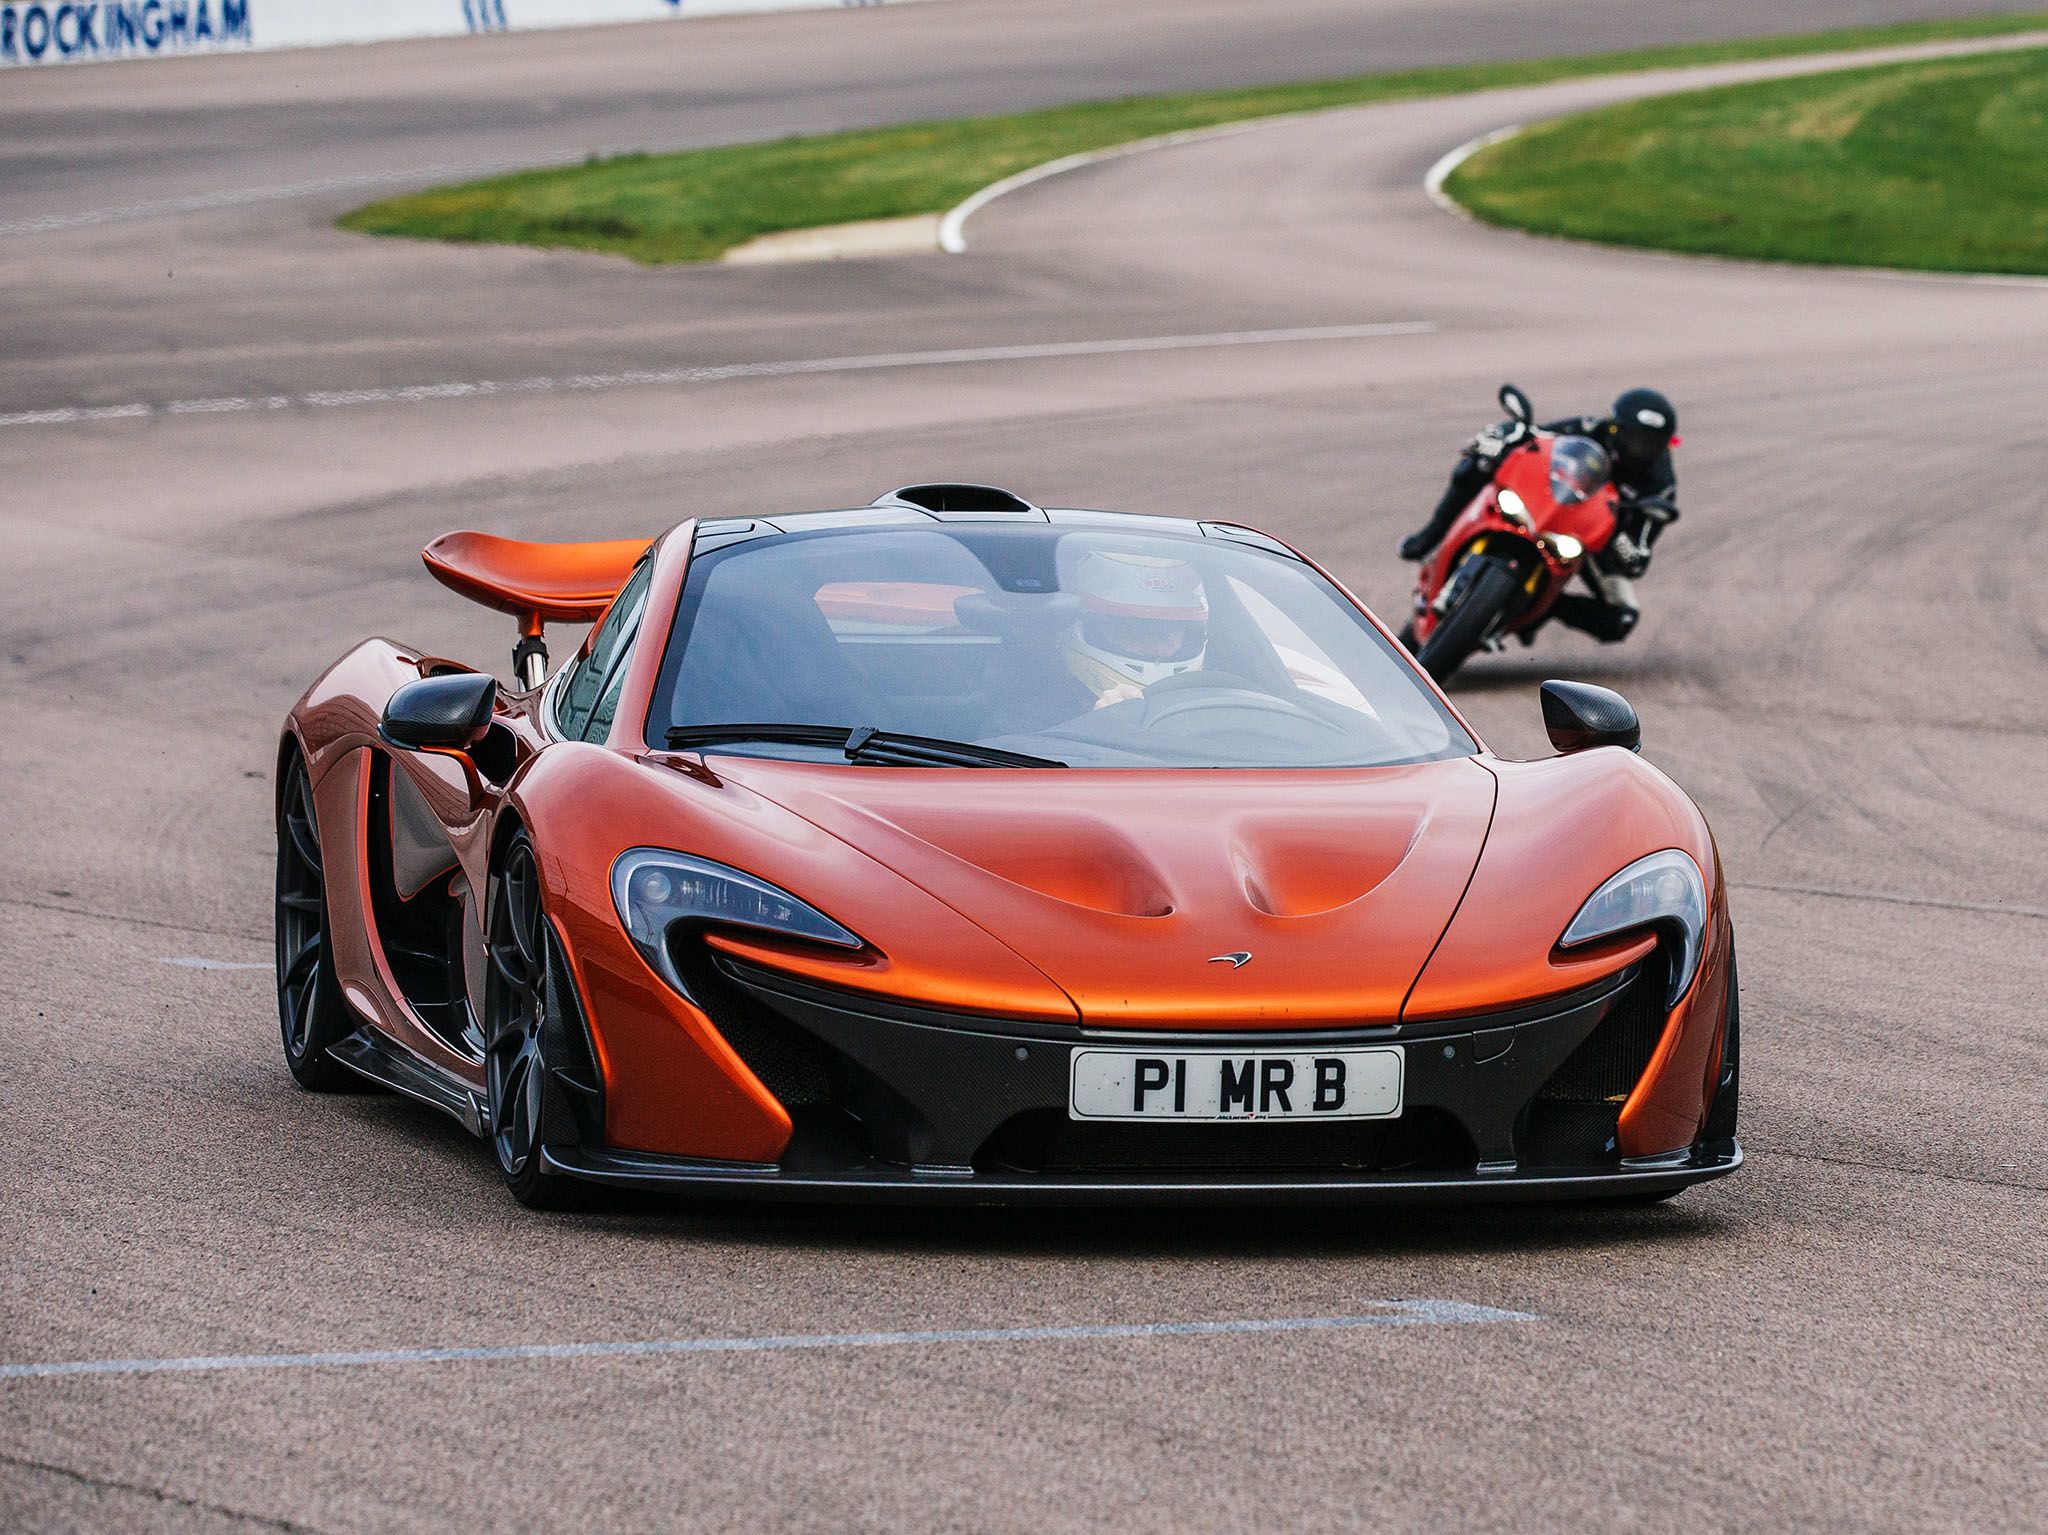 Leicester, UK: P1 and  Bike on the track at the Rockingham Motor Speedway. This image is from... [Photo of the day - May 2017]